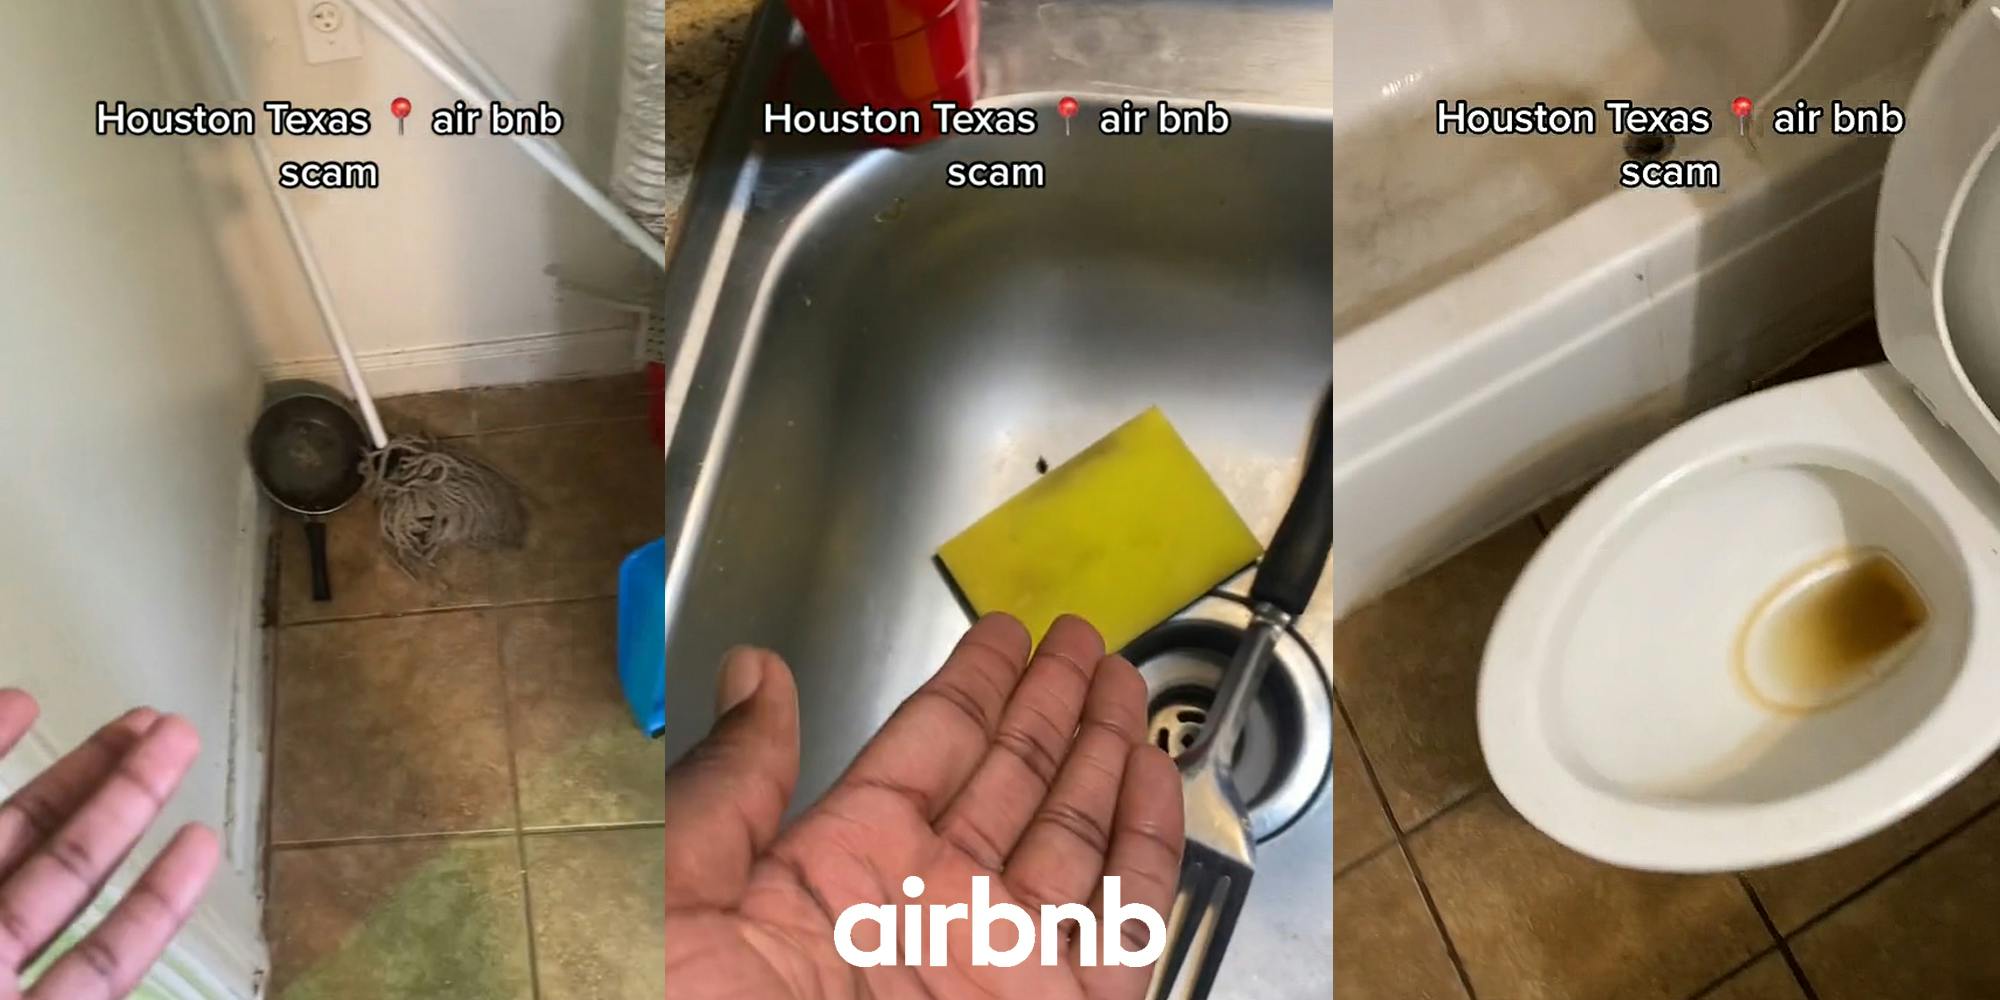 man with hand out towards random pan thrown in corner with cleaning supplies with caption "Houston Texas Air bnb scam" (l) man hand out towards roach in sink next to sponge caption "Houston Texas Air bnb scam" (c) dirty toilet and bathtub with caption "Houston Texas Air bnb scam" (r)